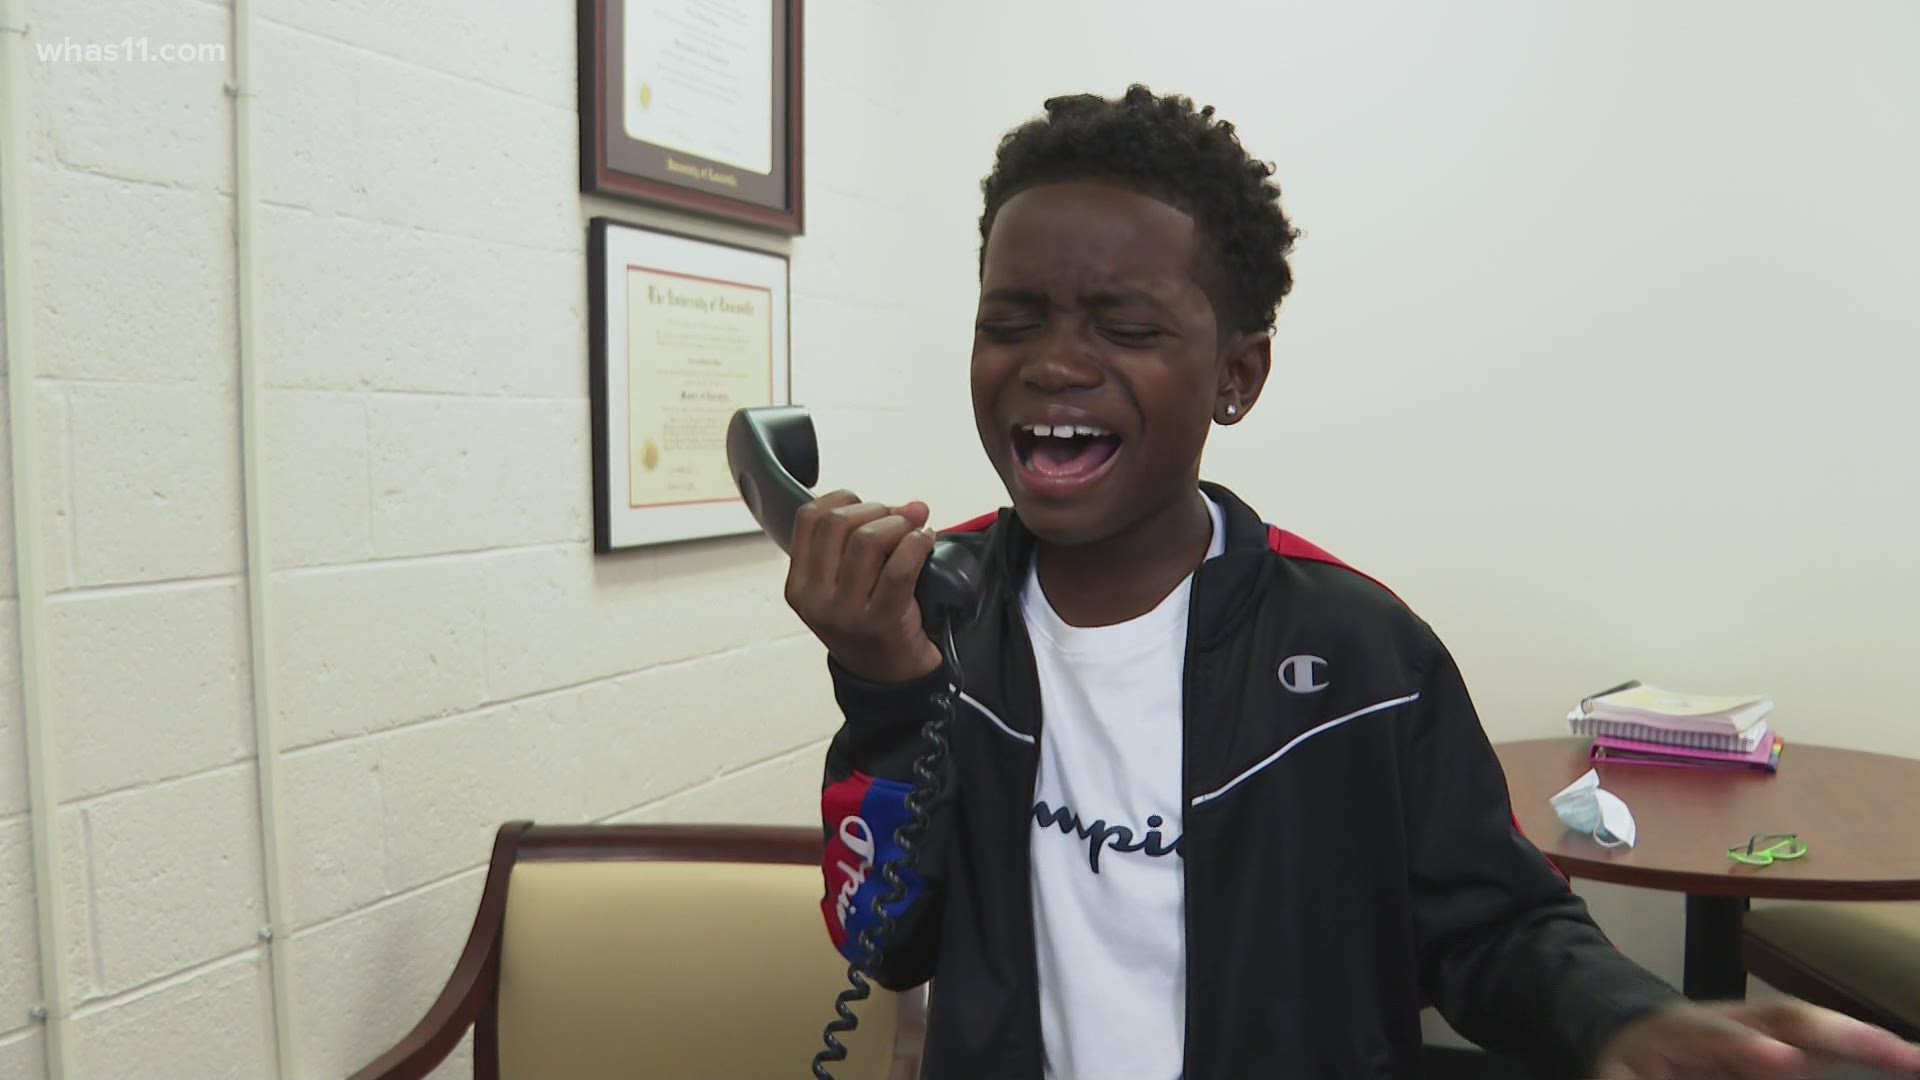 A third-grade student at Bates Elementary, DCorey Johnson, shared his amazing talent after the morning announcements.